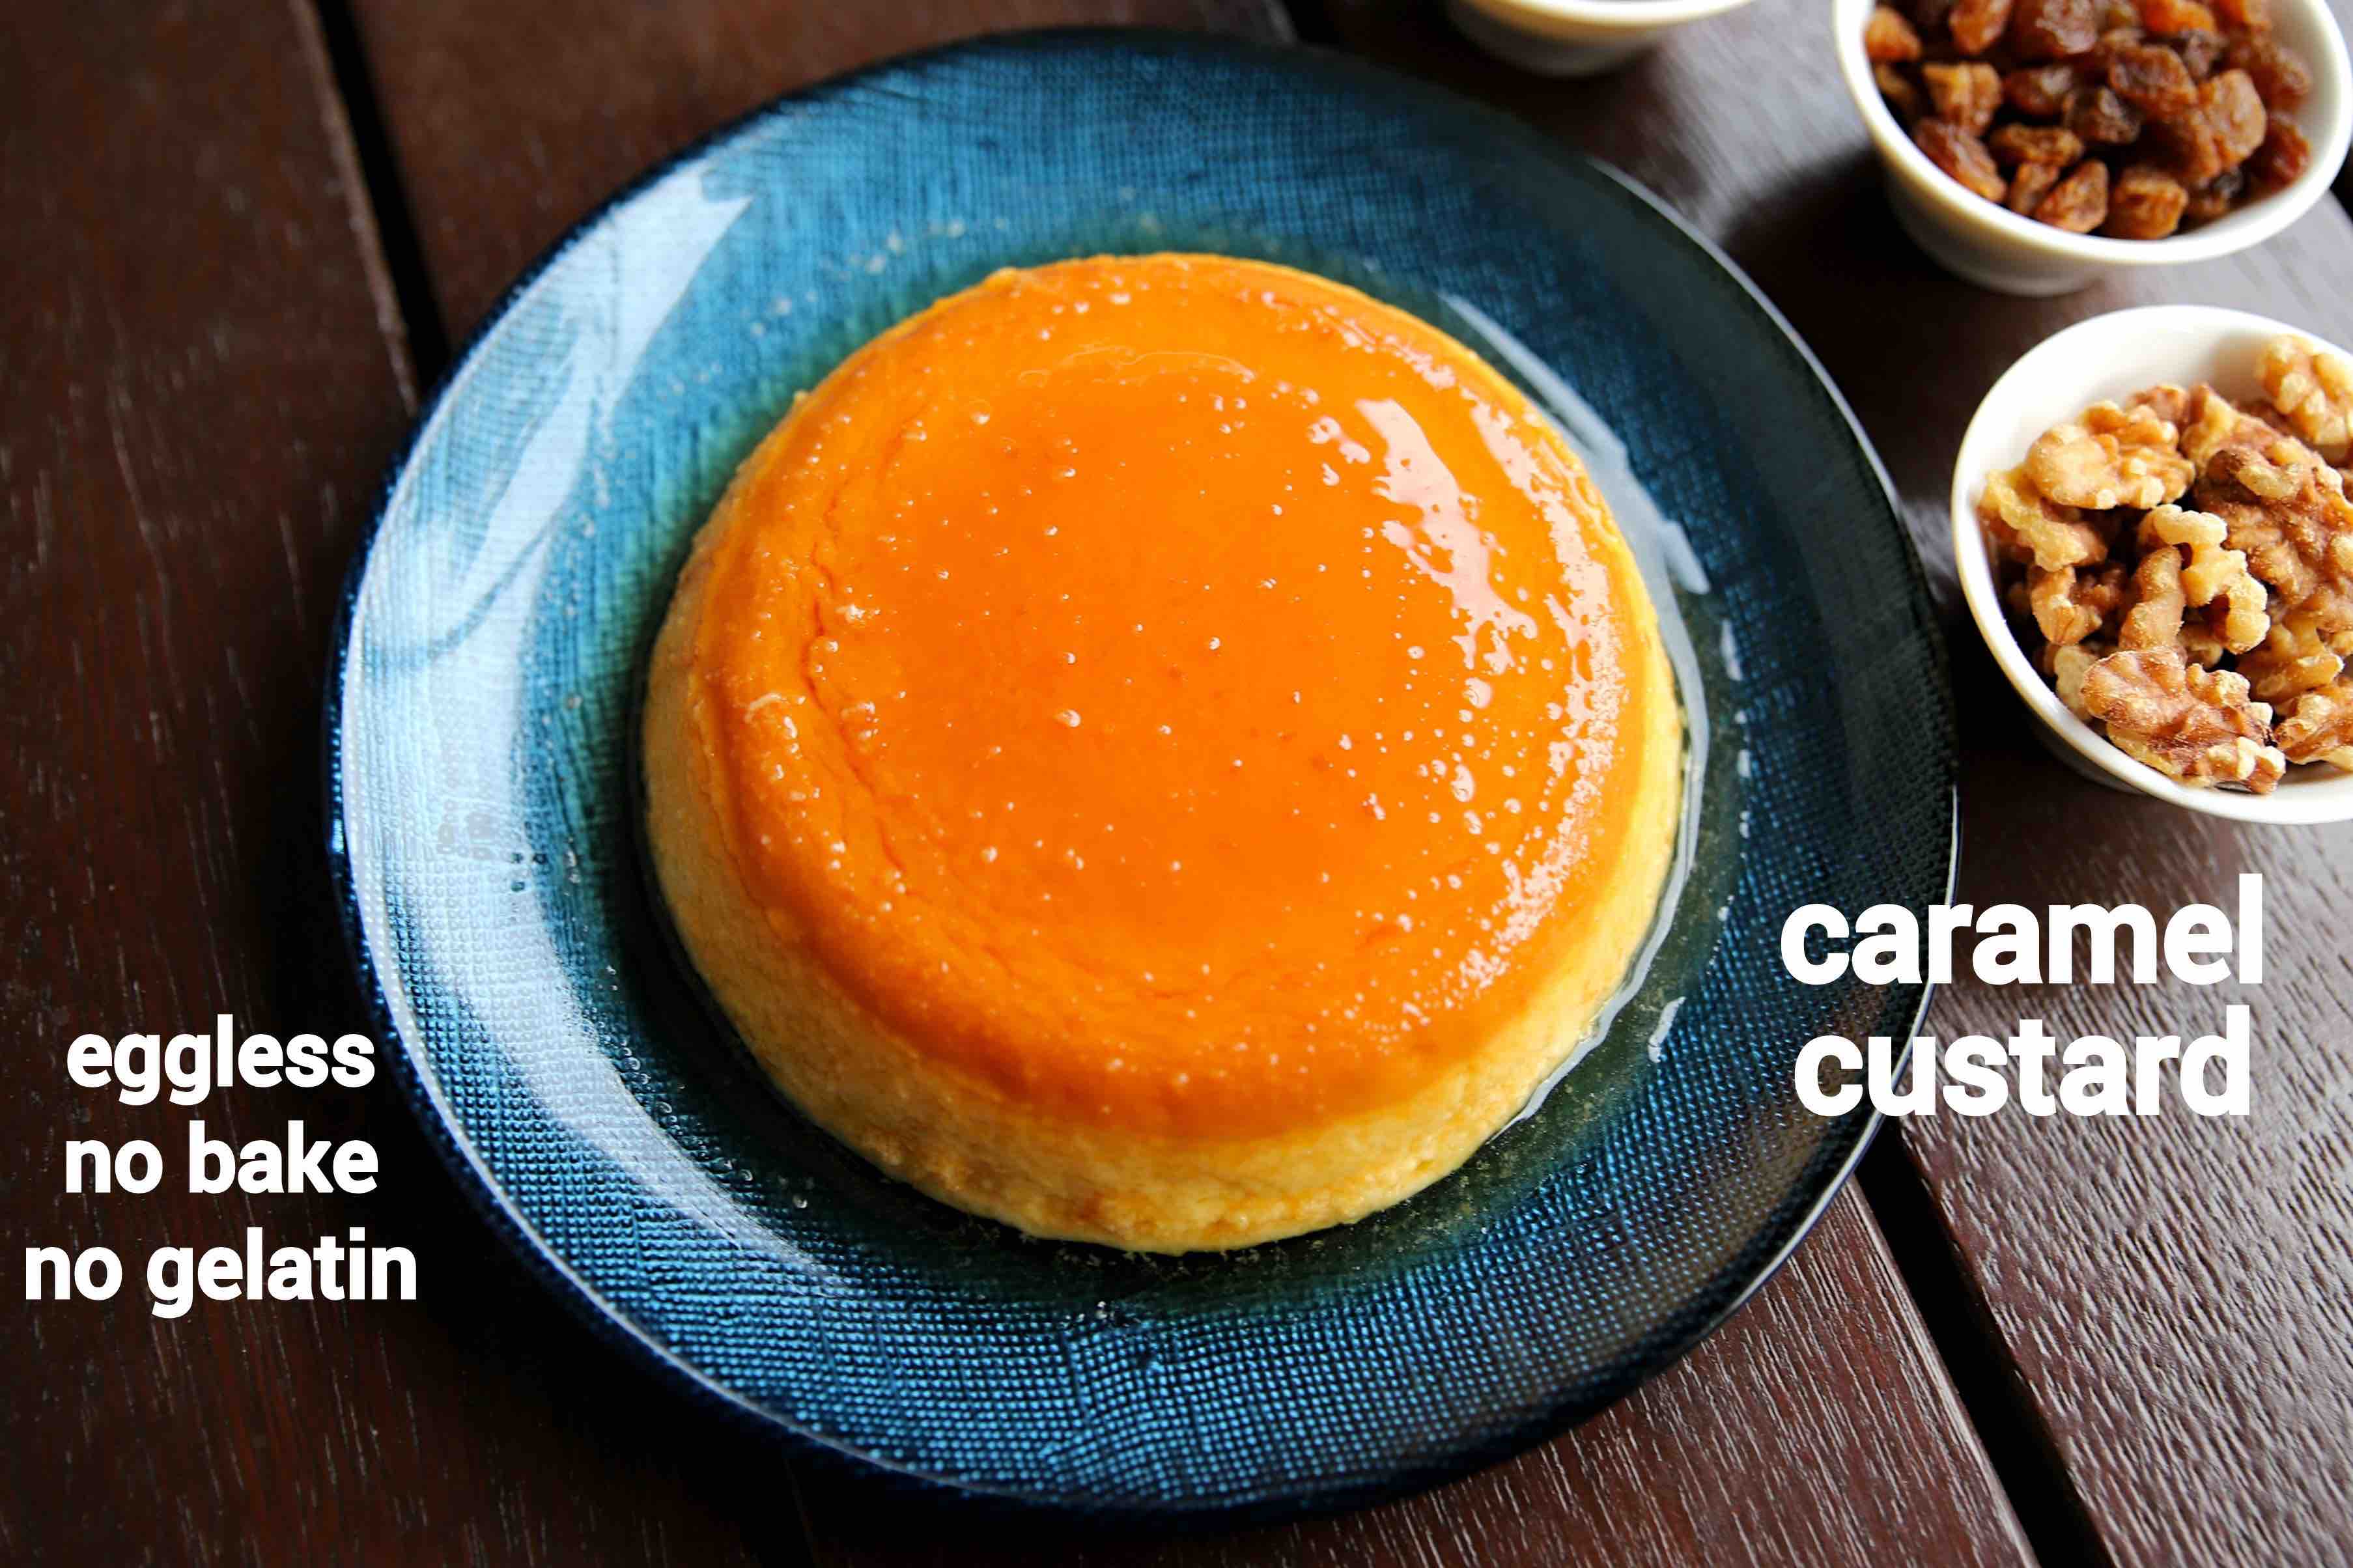 Easy Keto Flan- Just 4 ingredients! - The Big Man's World ®